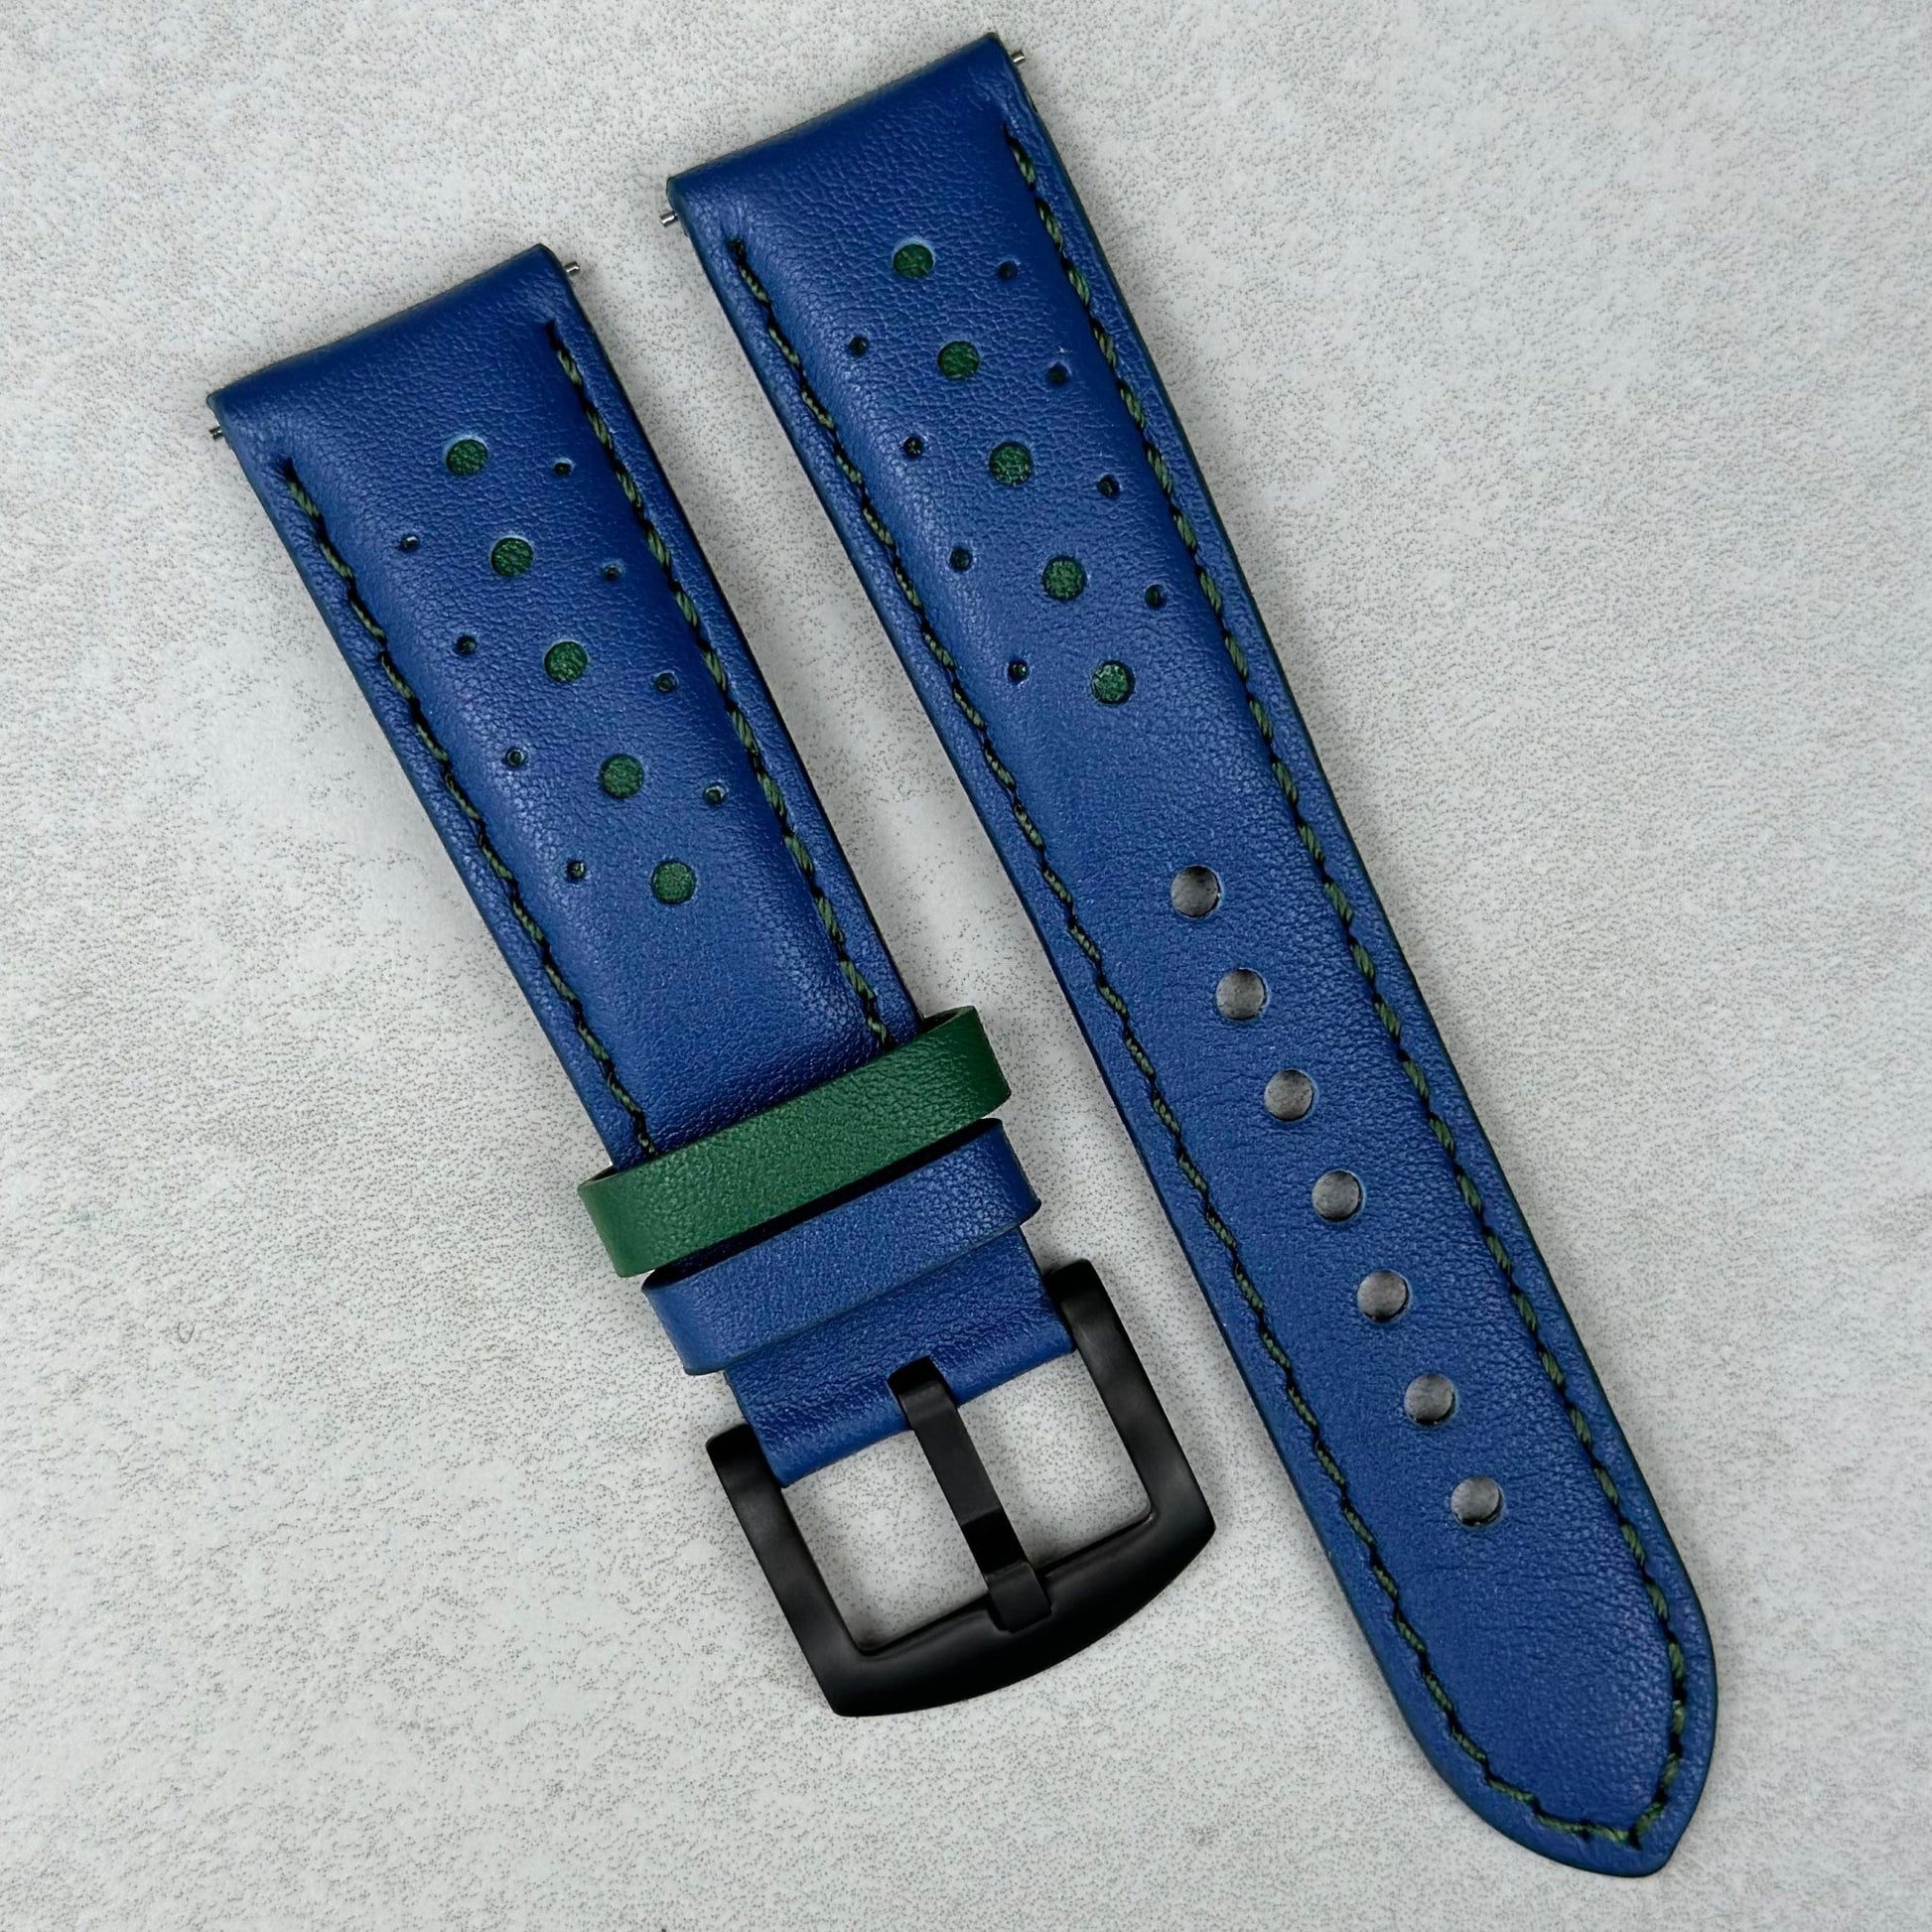 Le Mans blue and green full grain leather watch strap. PVD black brushed 316L stainless steel buckle.